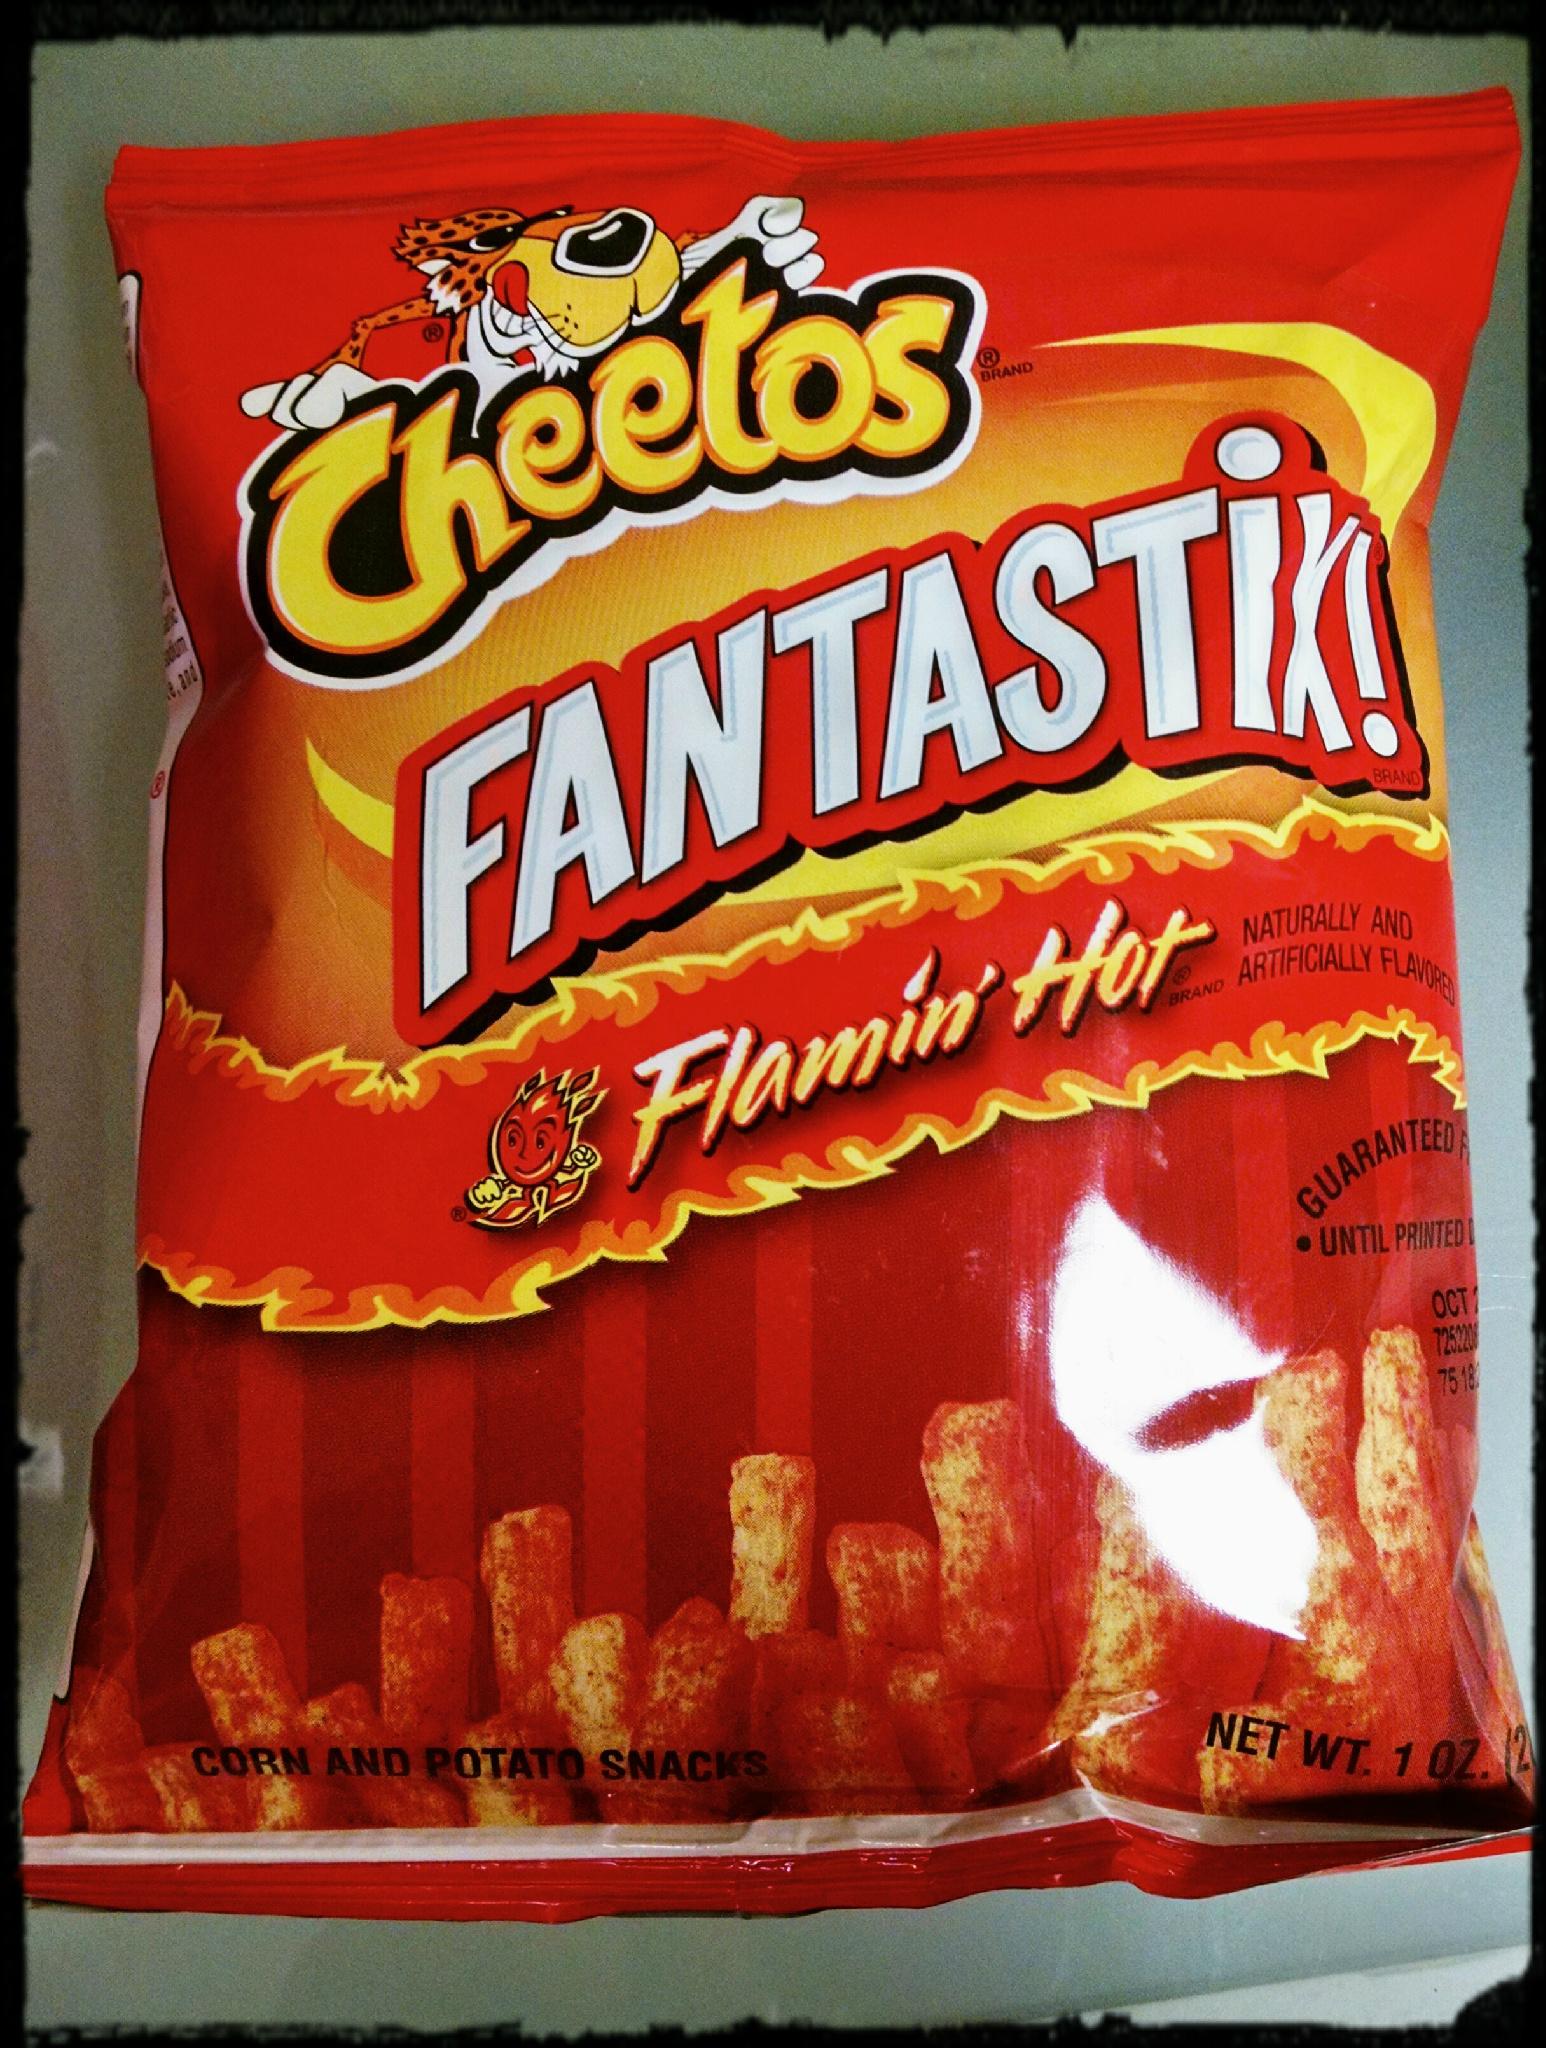 Hillies Shop on X: Have you tried our new snack? We have Cheetos